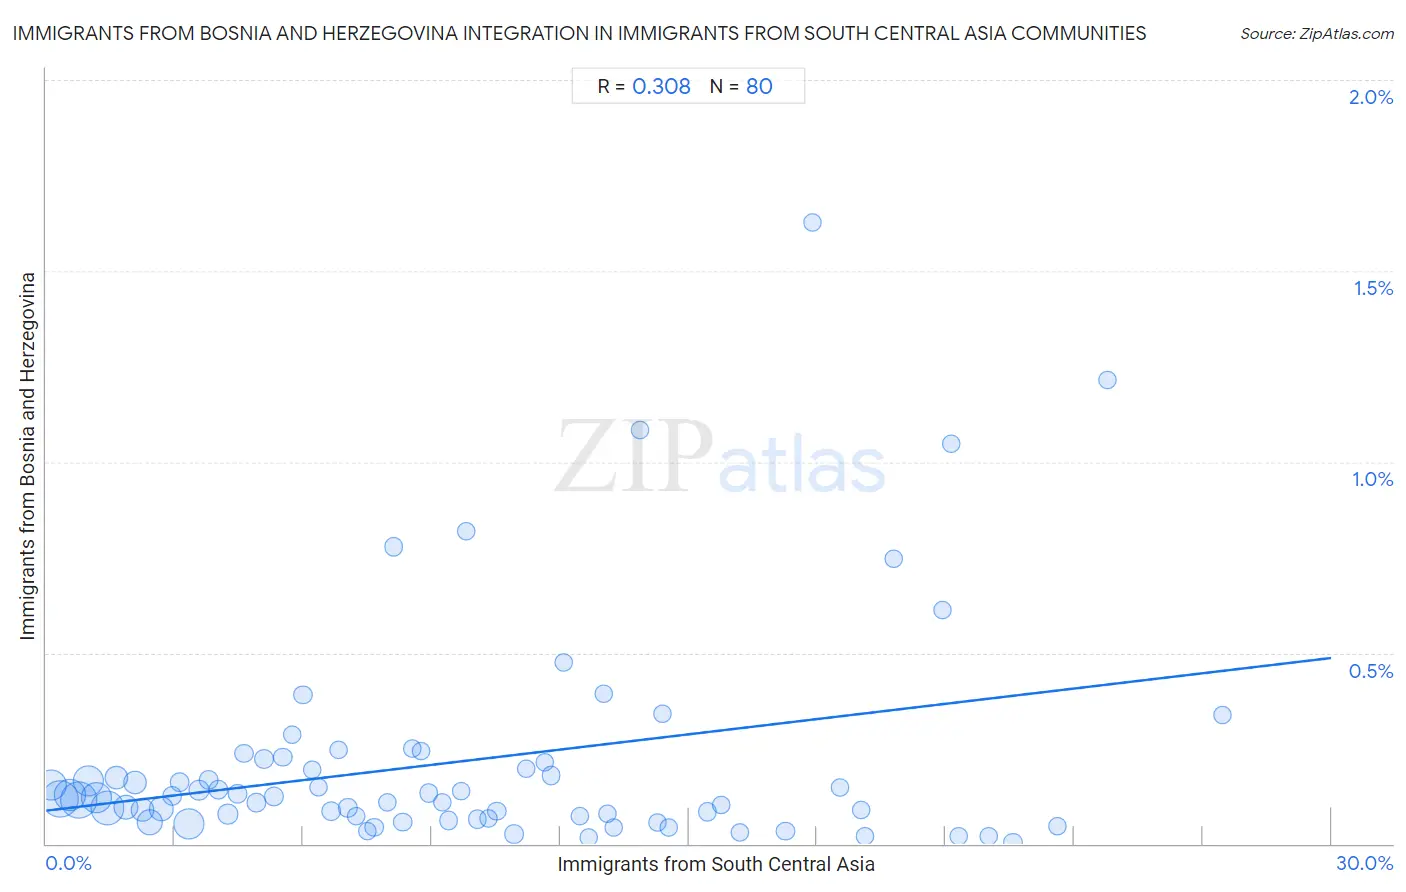 Immigrants from South Central Asia Integration in Immigrants from Bosnia and Herzegovina Communities